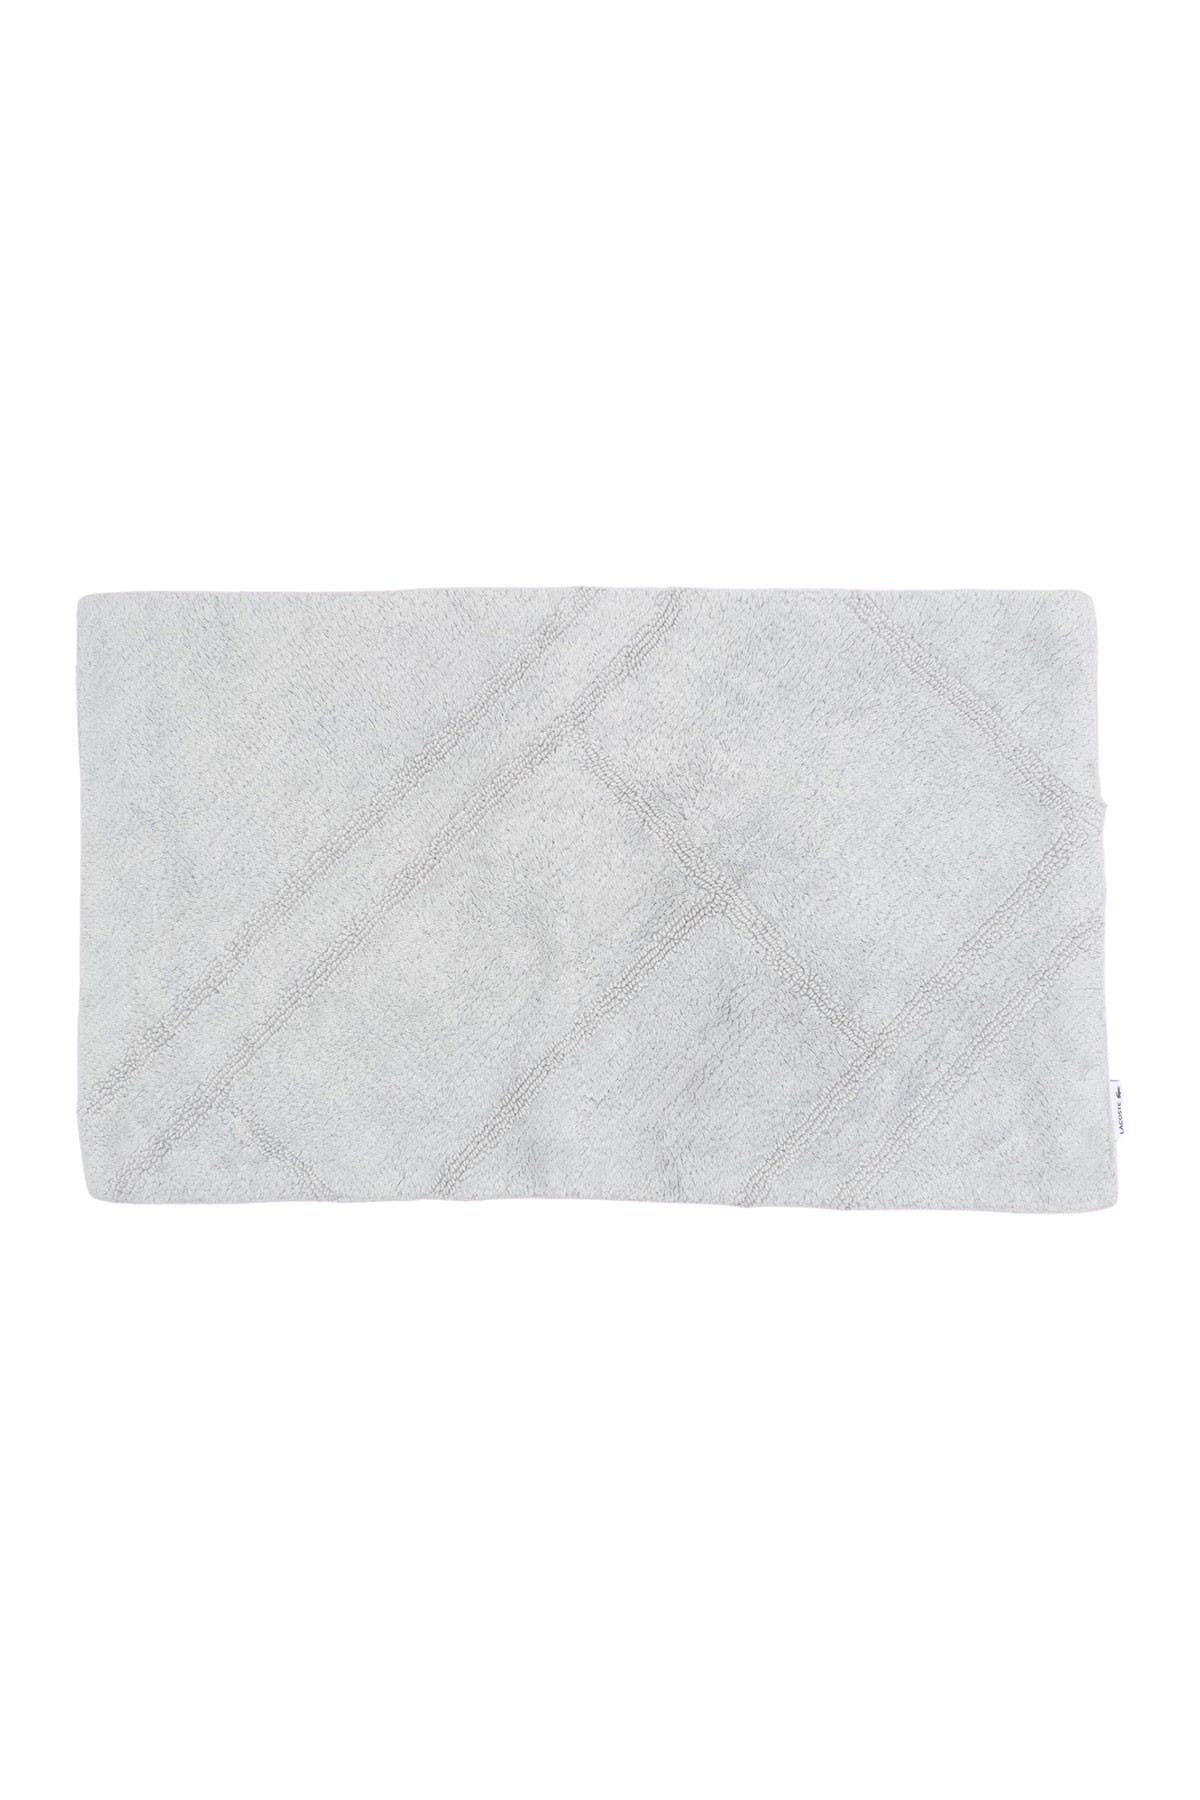 Lacoste | Micro Chip Line Rug - 21\